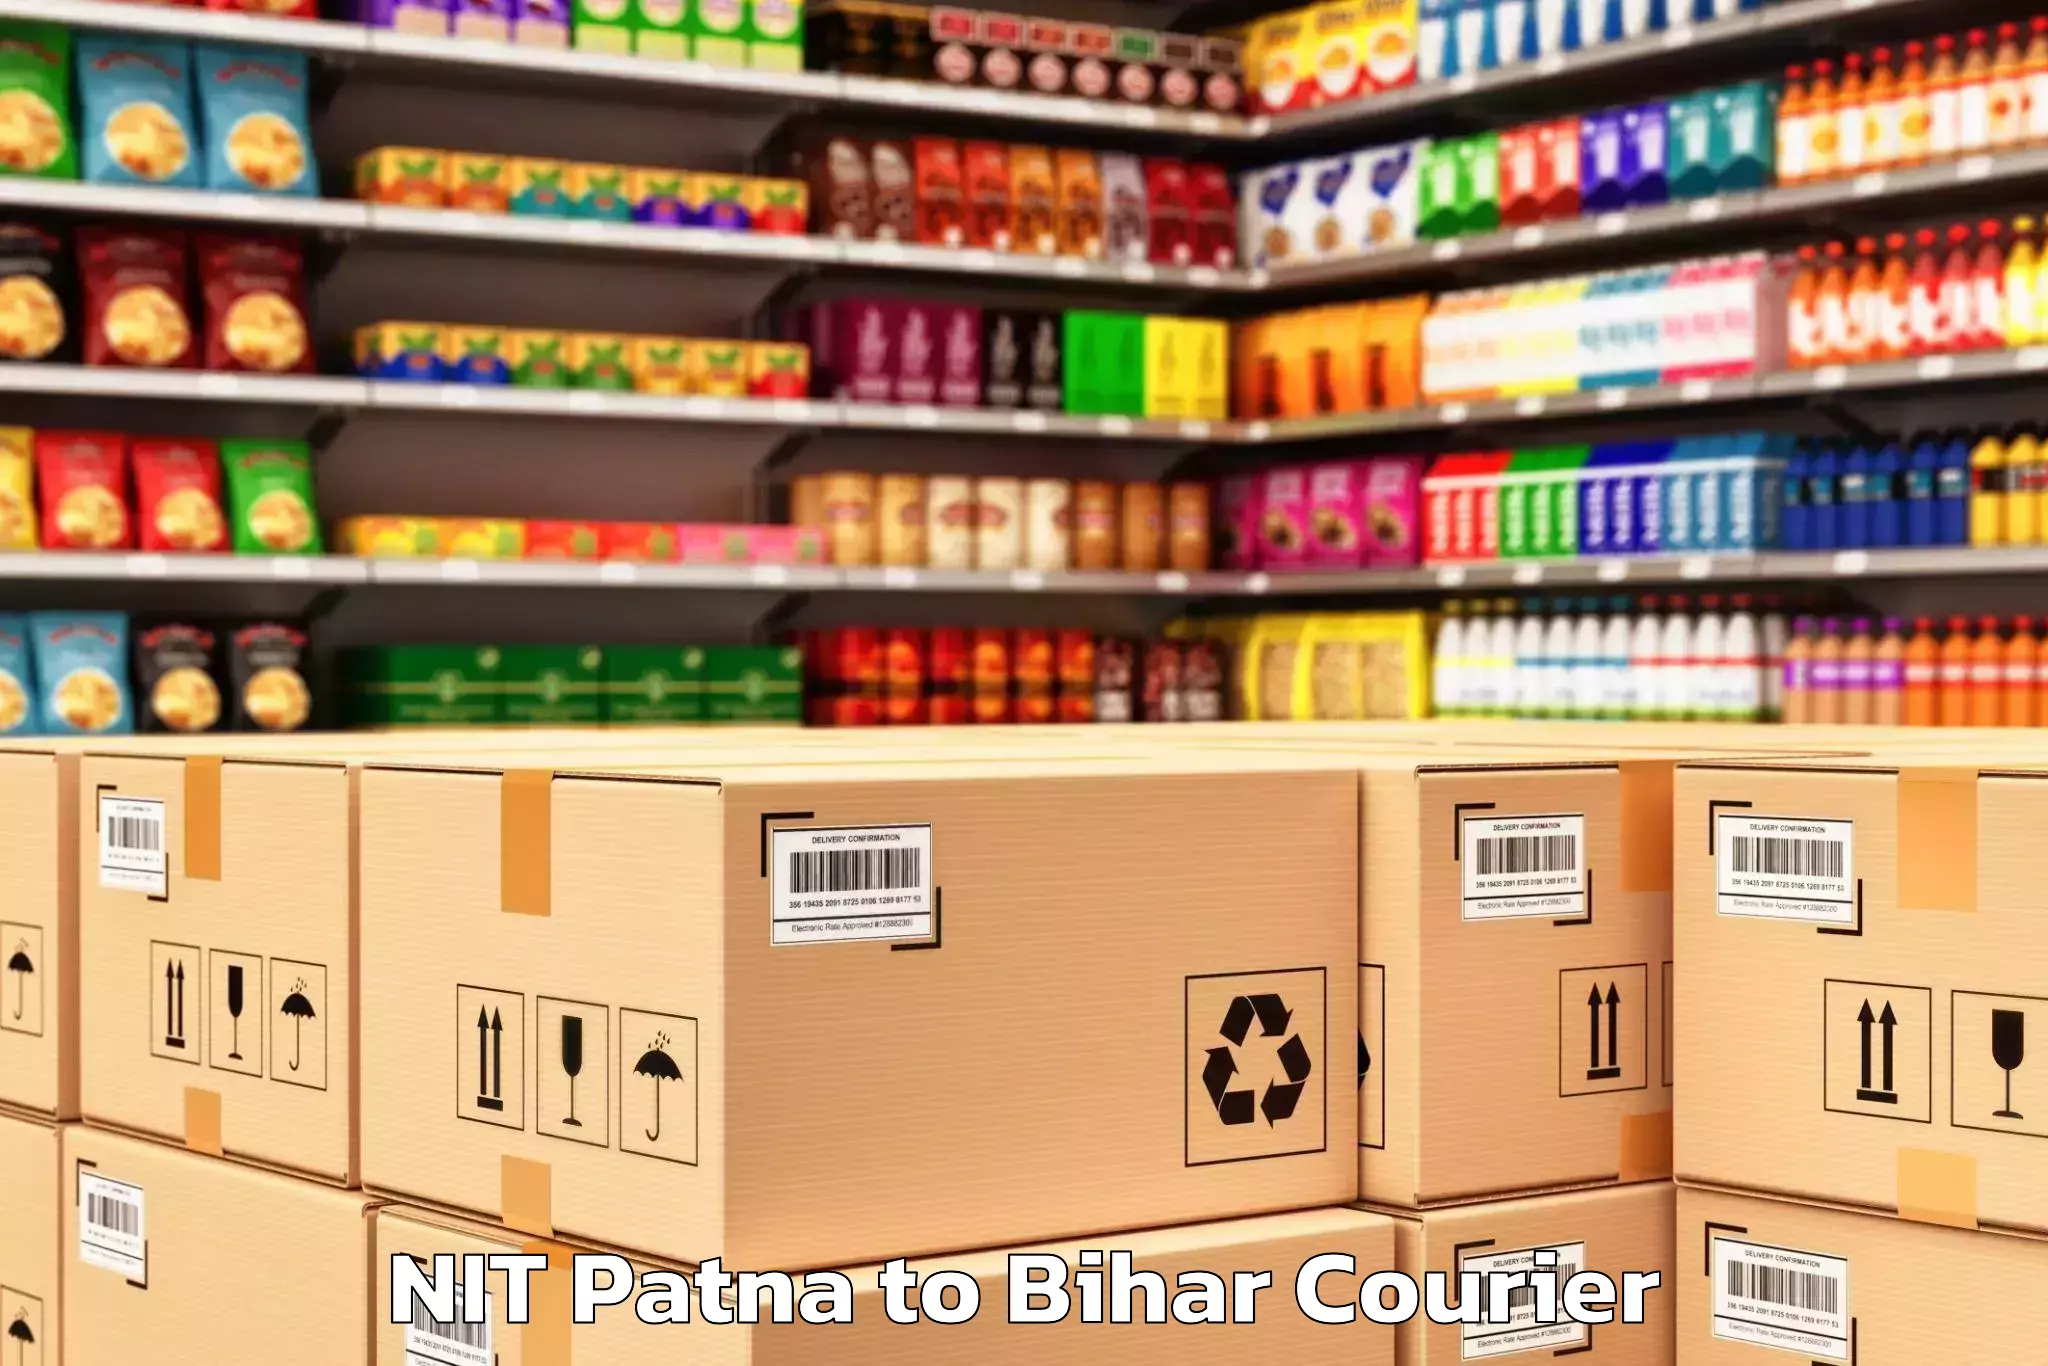 Furniture delivery service NIT Patna to Fatwah